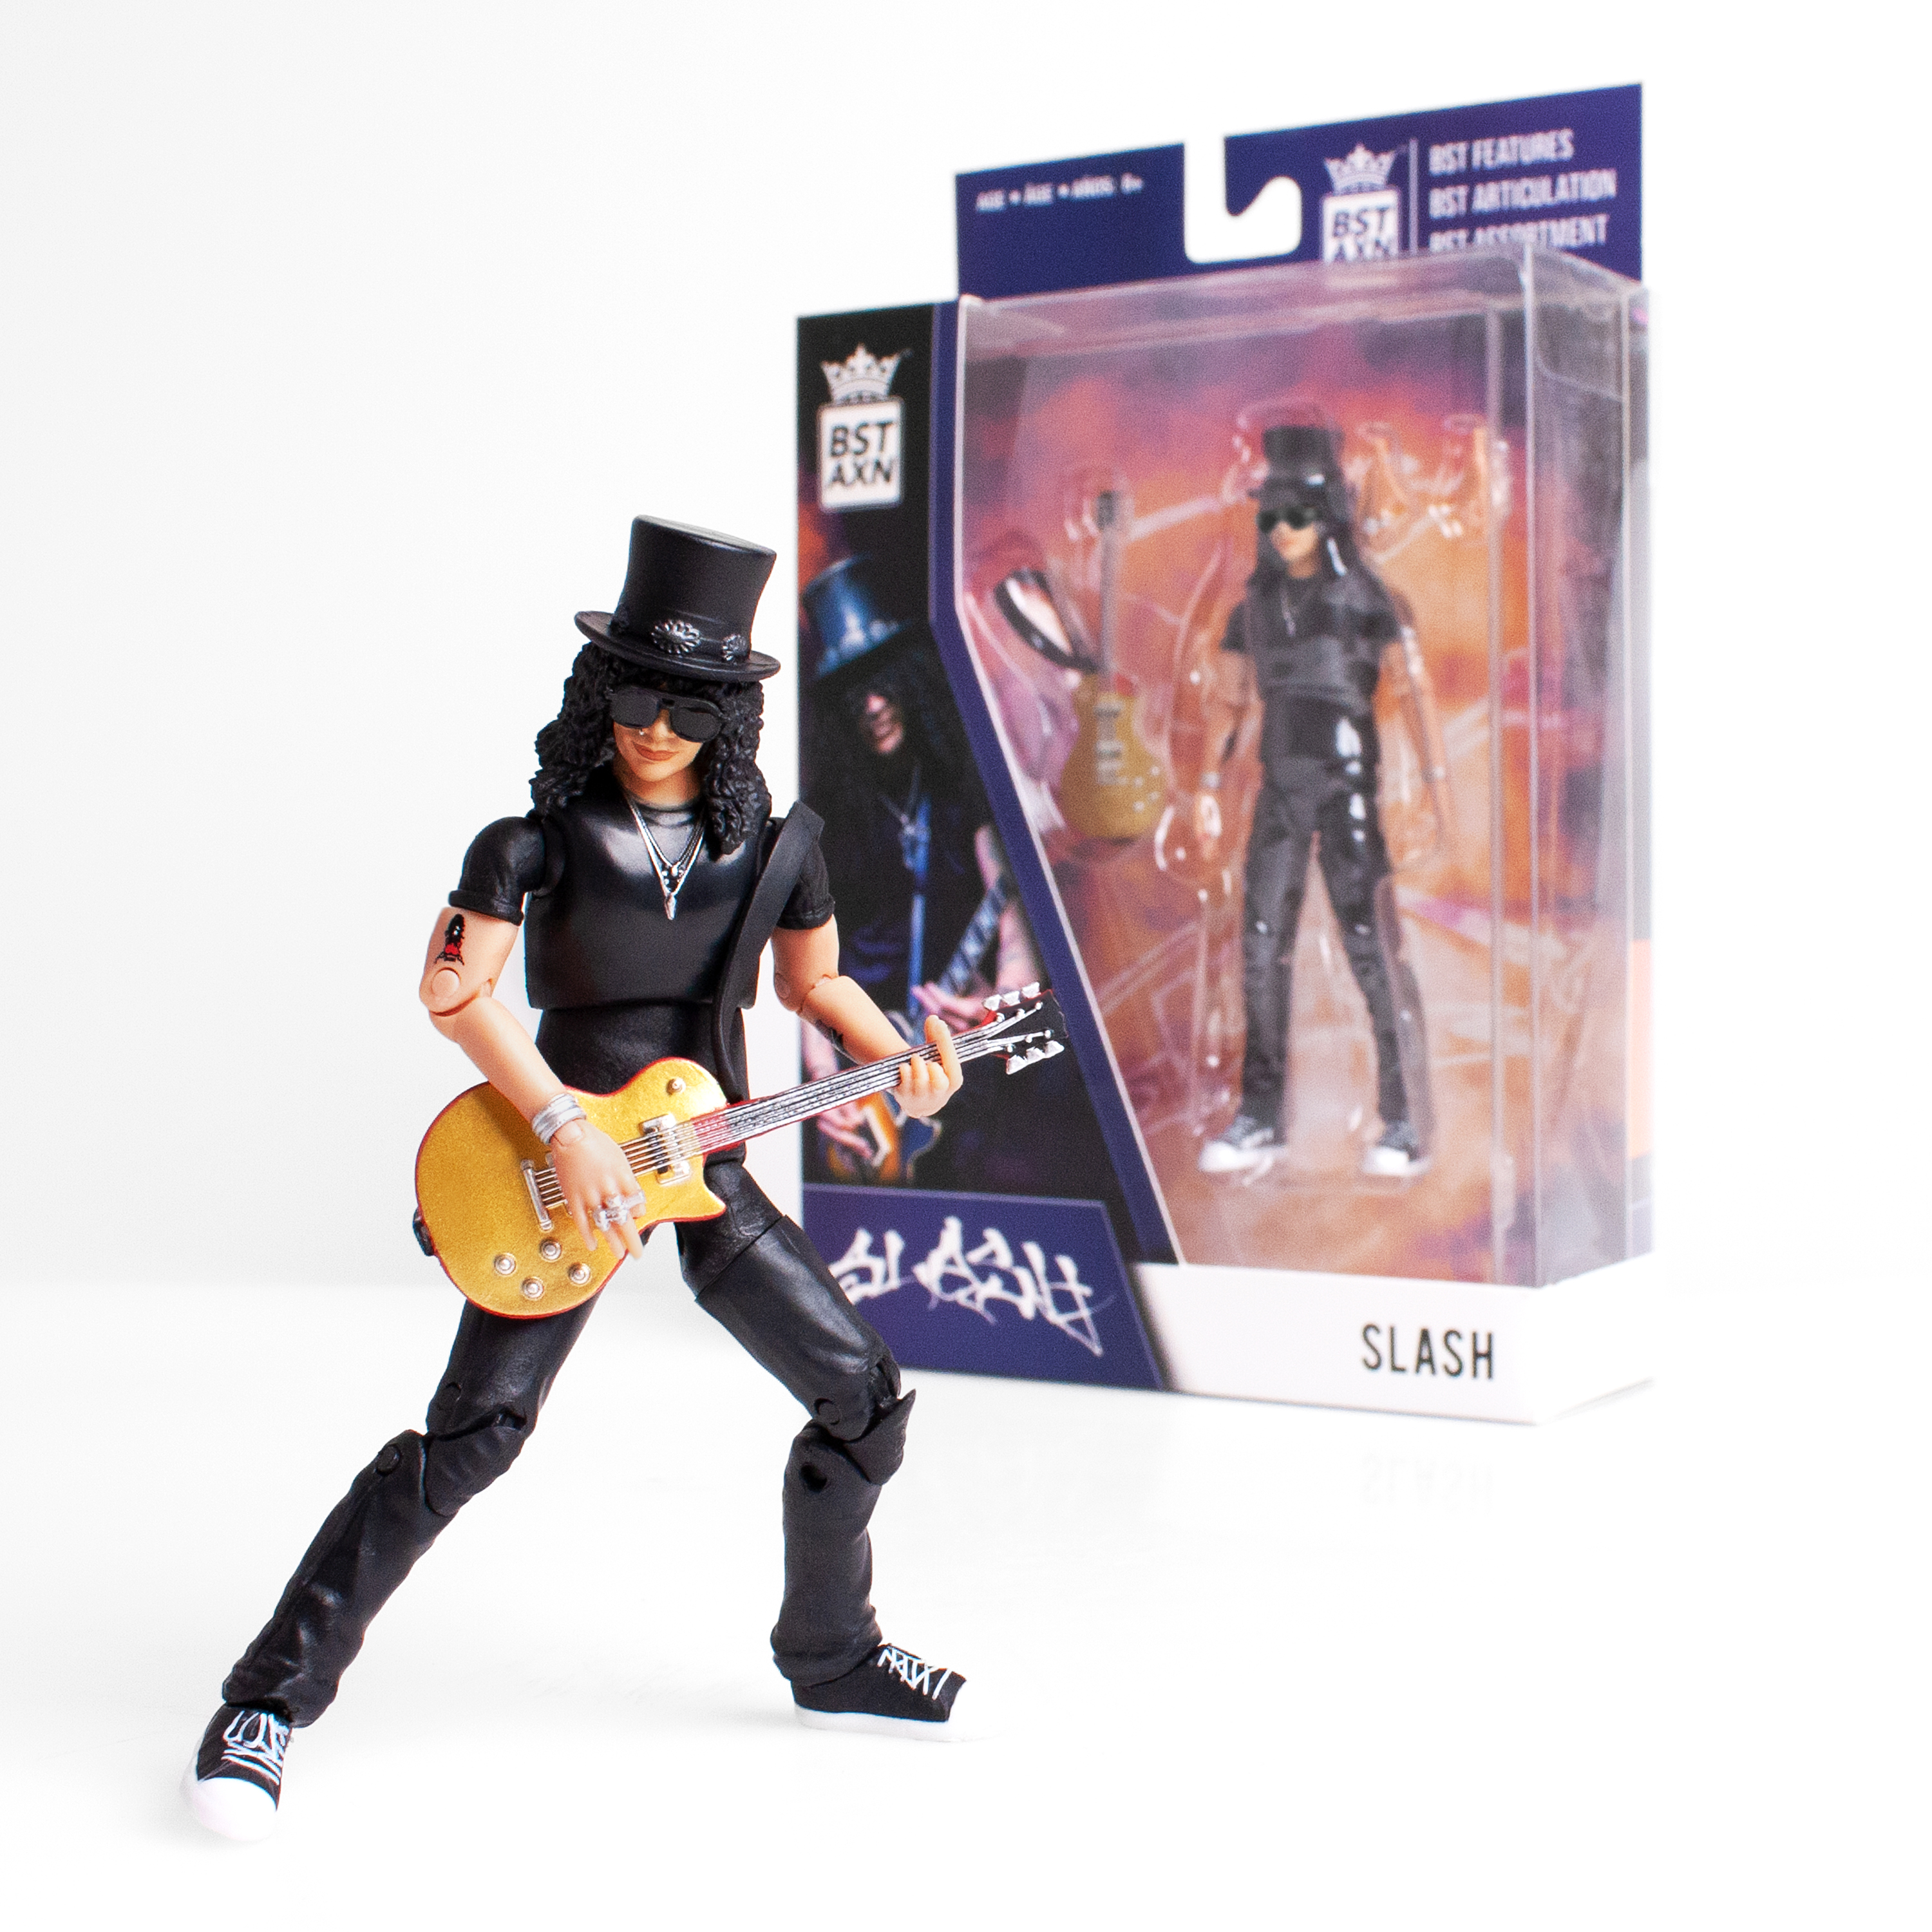 Guns N Roses Slash - The Loyal Subjects BST AXN 5" Action Figure - image 5 of 5